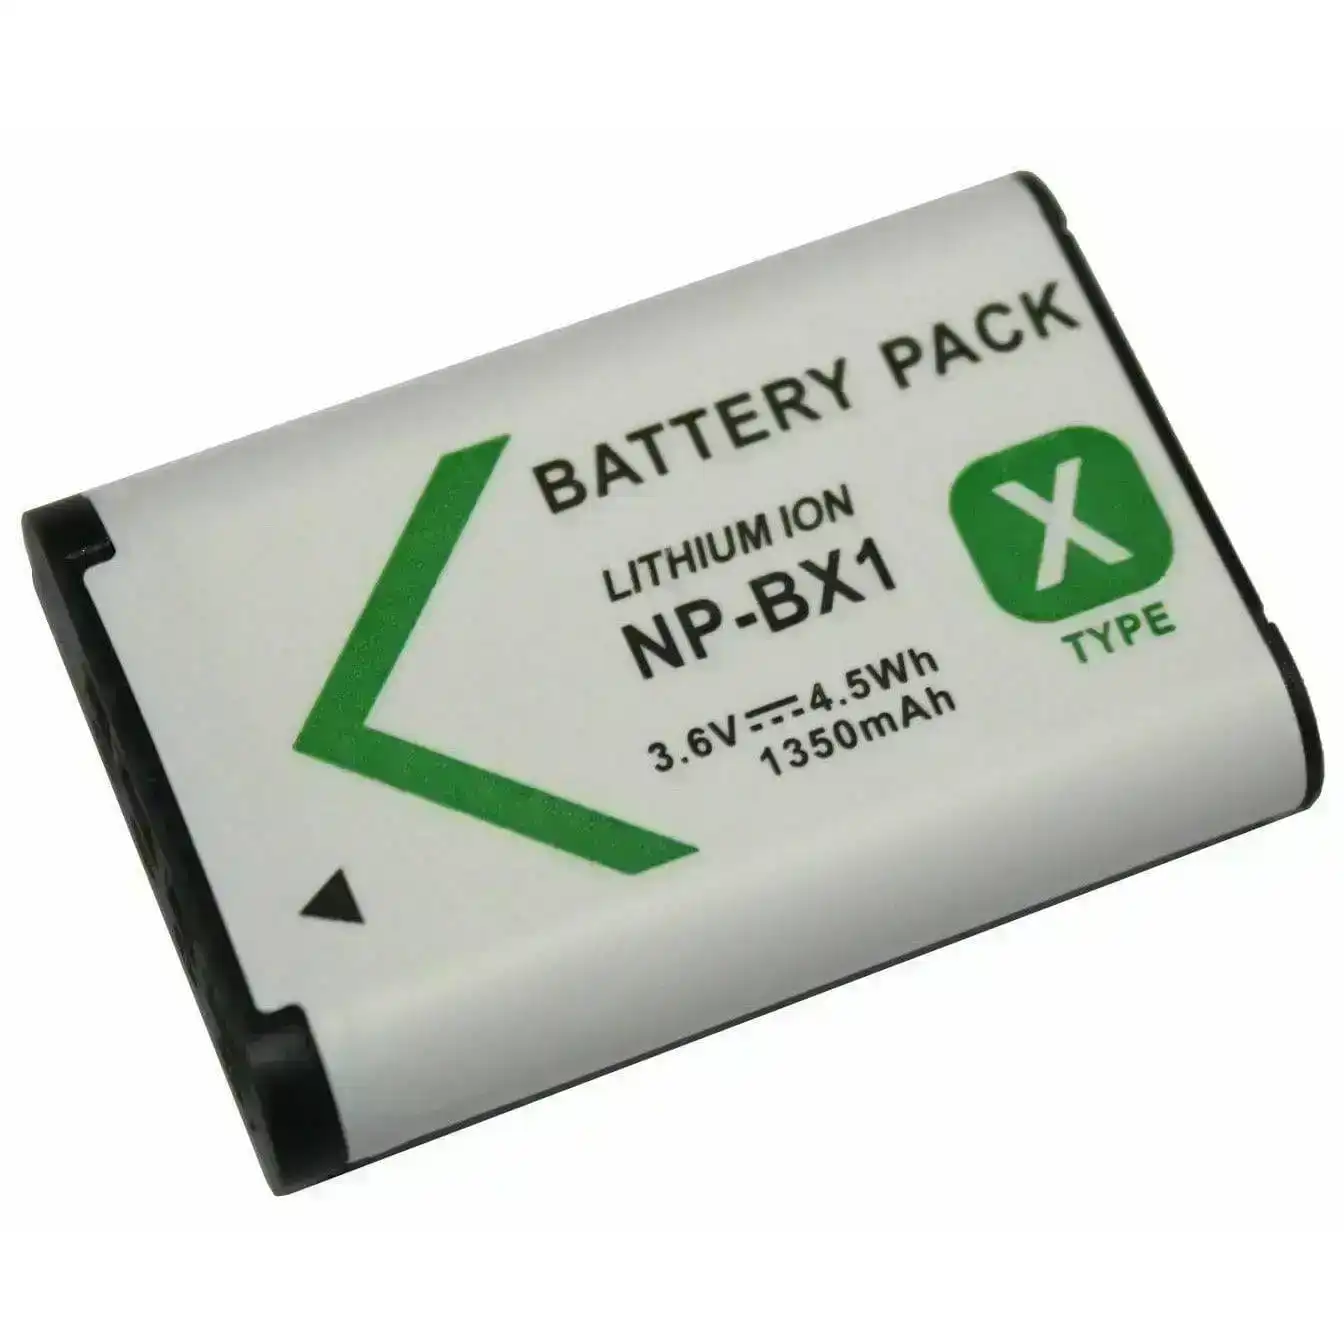 NP-BX1 Compatible Battery for Sony HDR-PJ410 HDR-CX405 FDRX3000 Camcorder